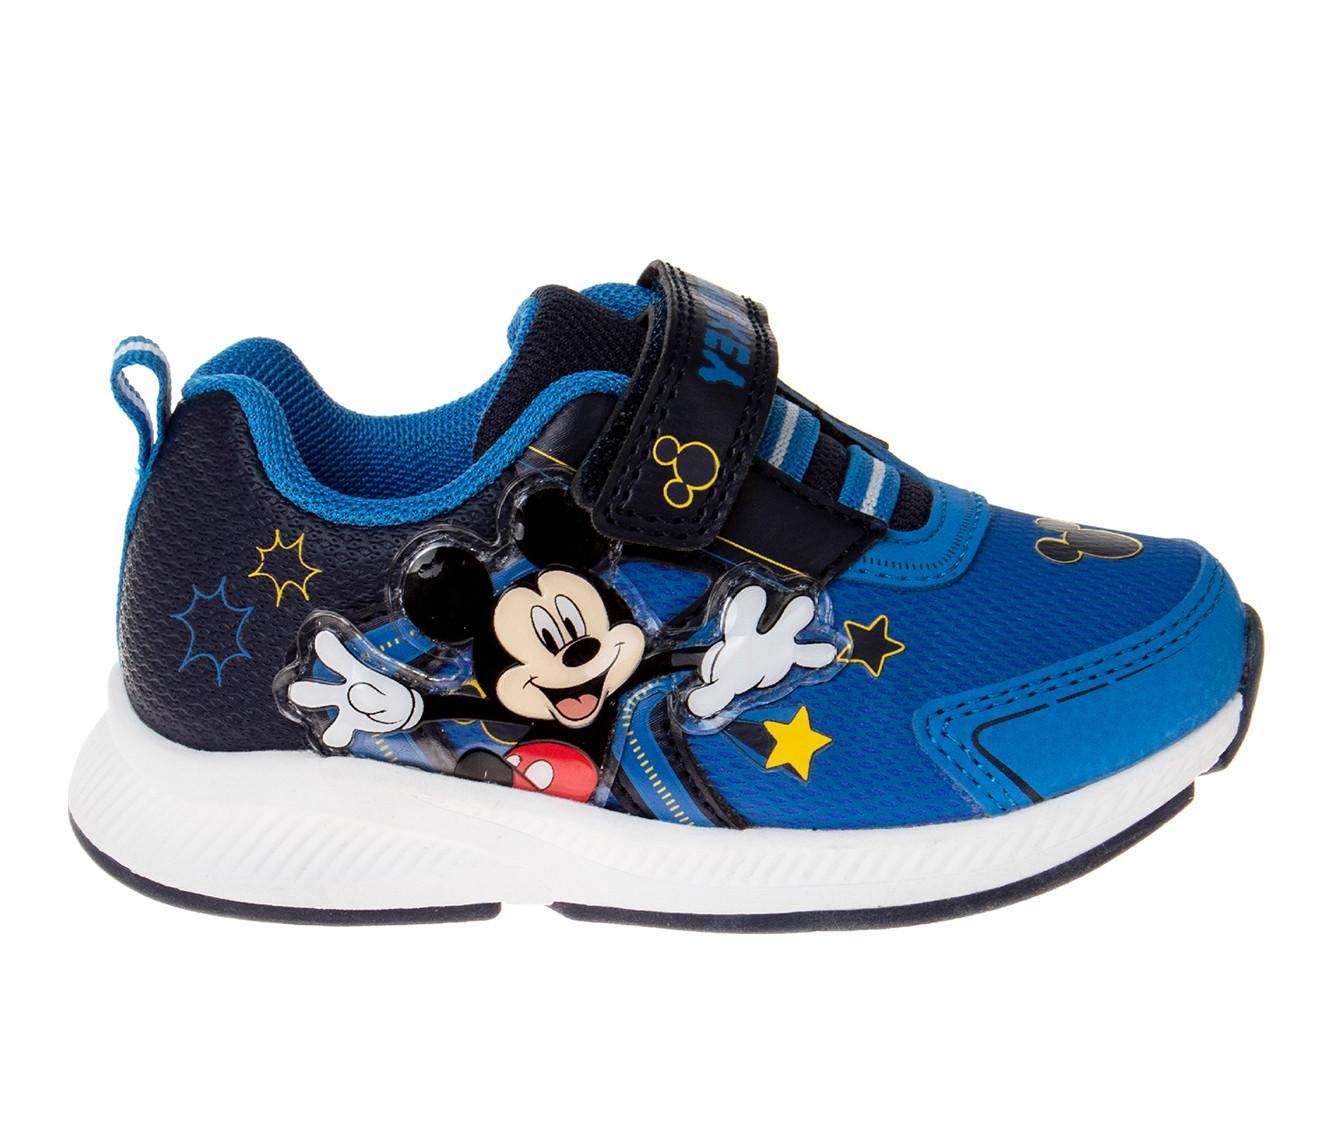 Boys' Disney Toddler & LIttle Kid Mickey the Star Light Up Sneakers